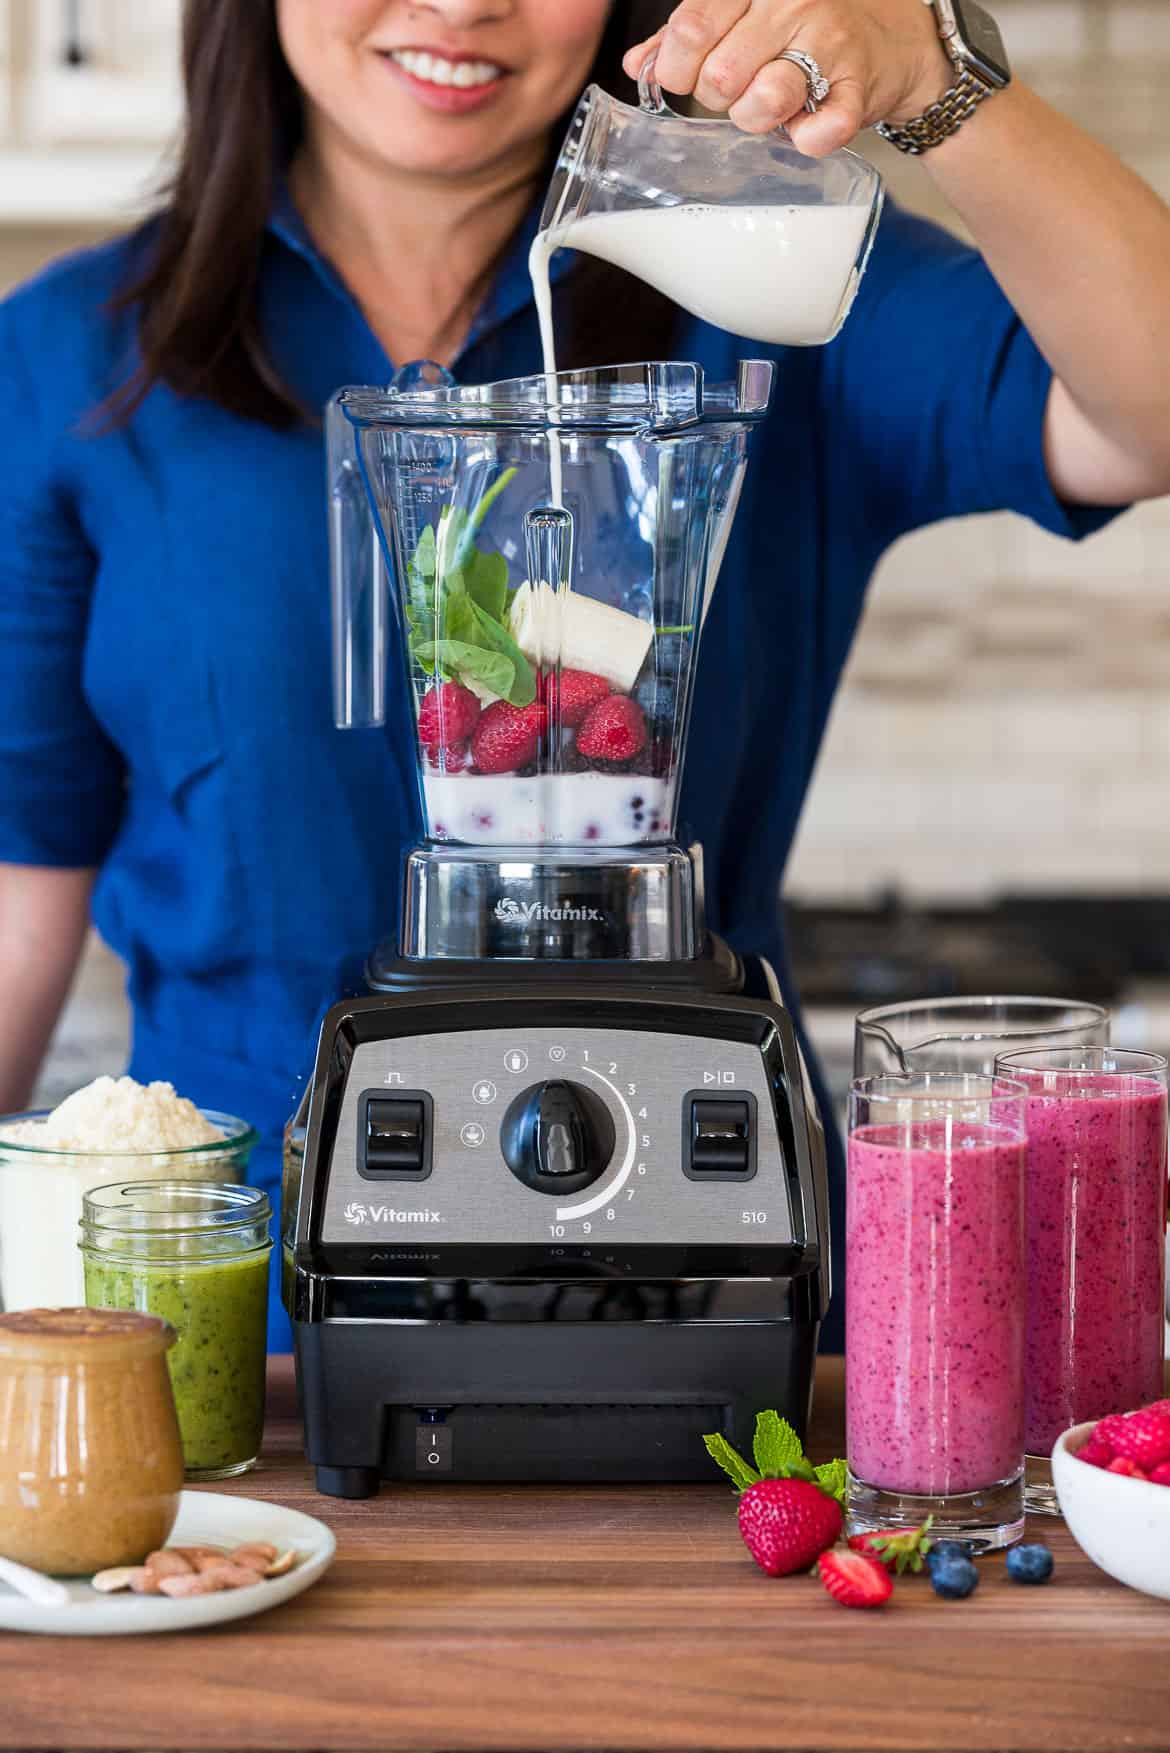 Instant Pot Created a Cooking Blender That Makes Soups and Nut Milks